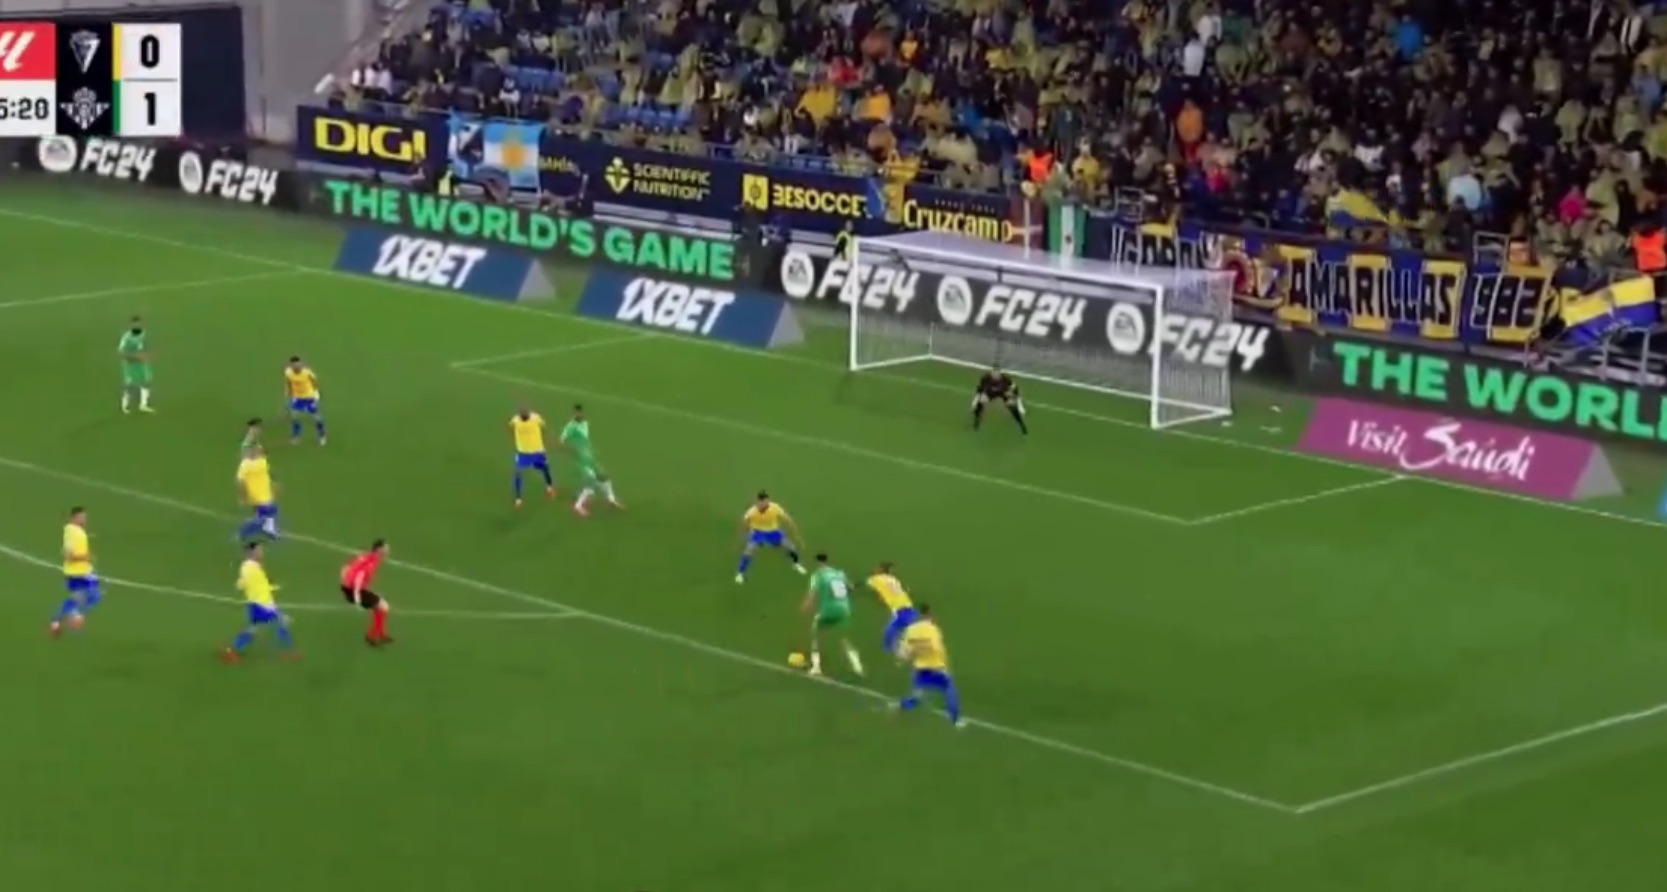 Pablo Fornals conjured a wonder goal first time out for Betis in LaLiga